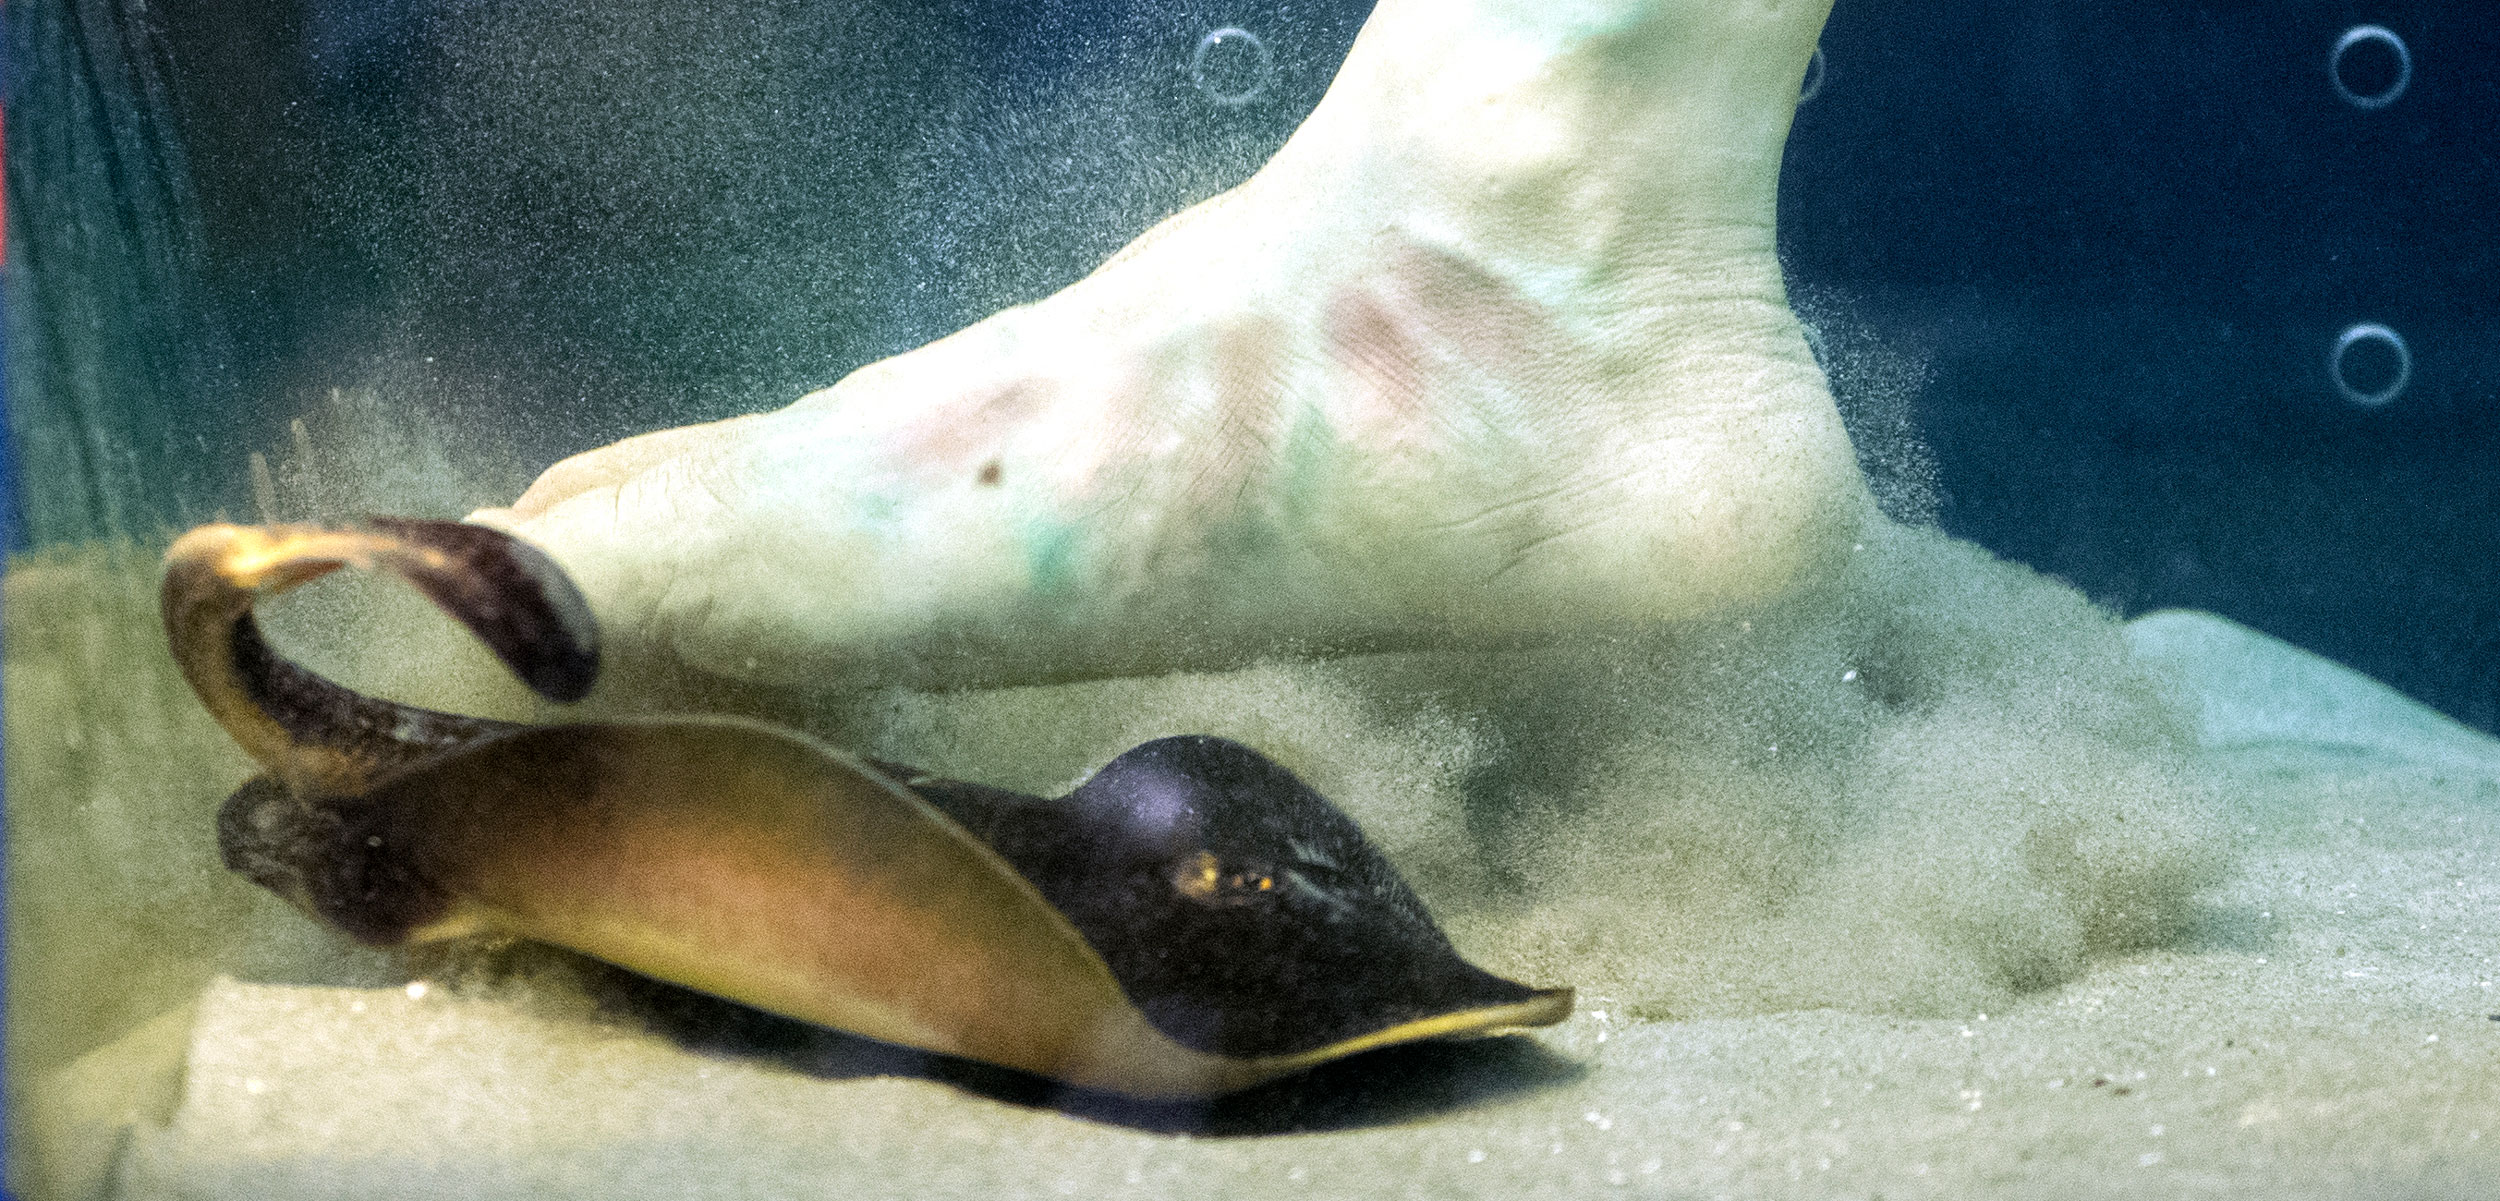 fake foot approaching a stingray in a tank